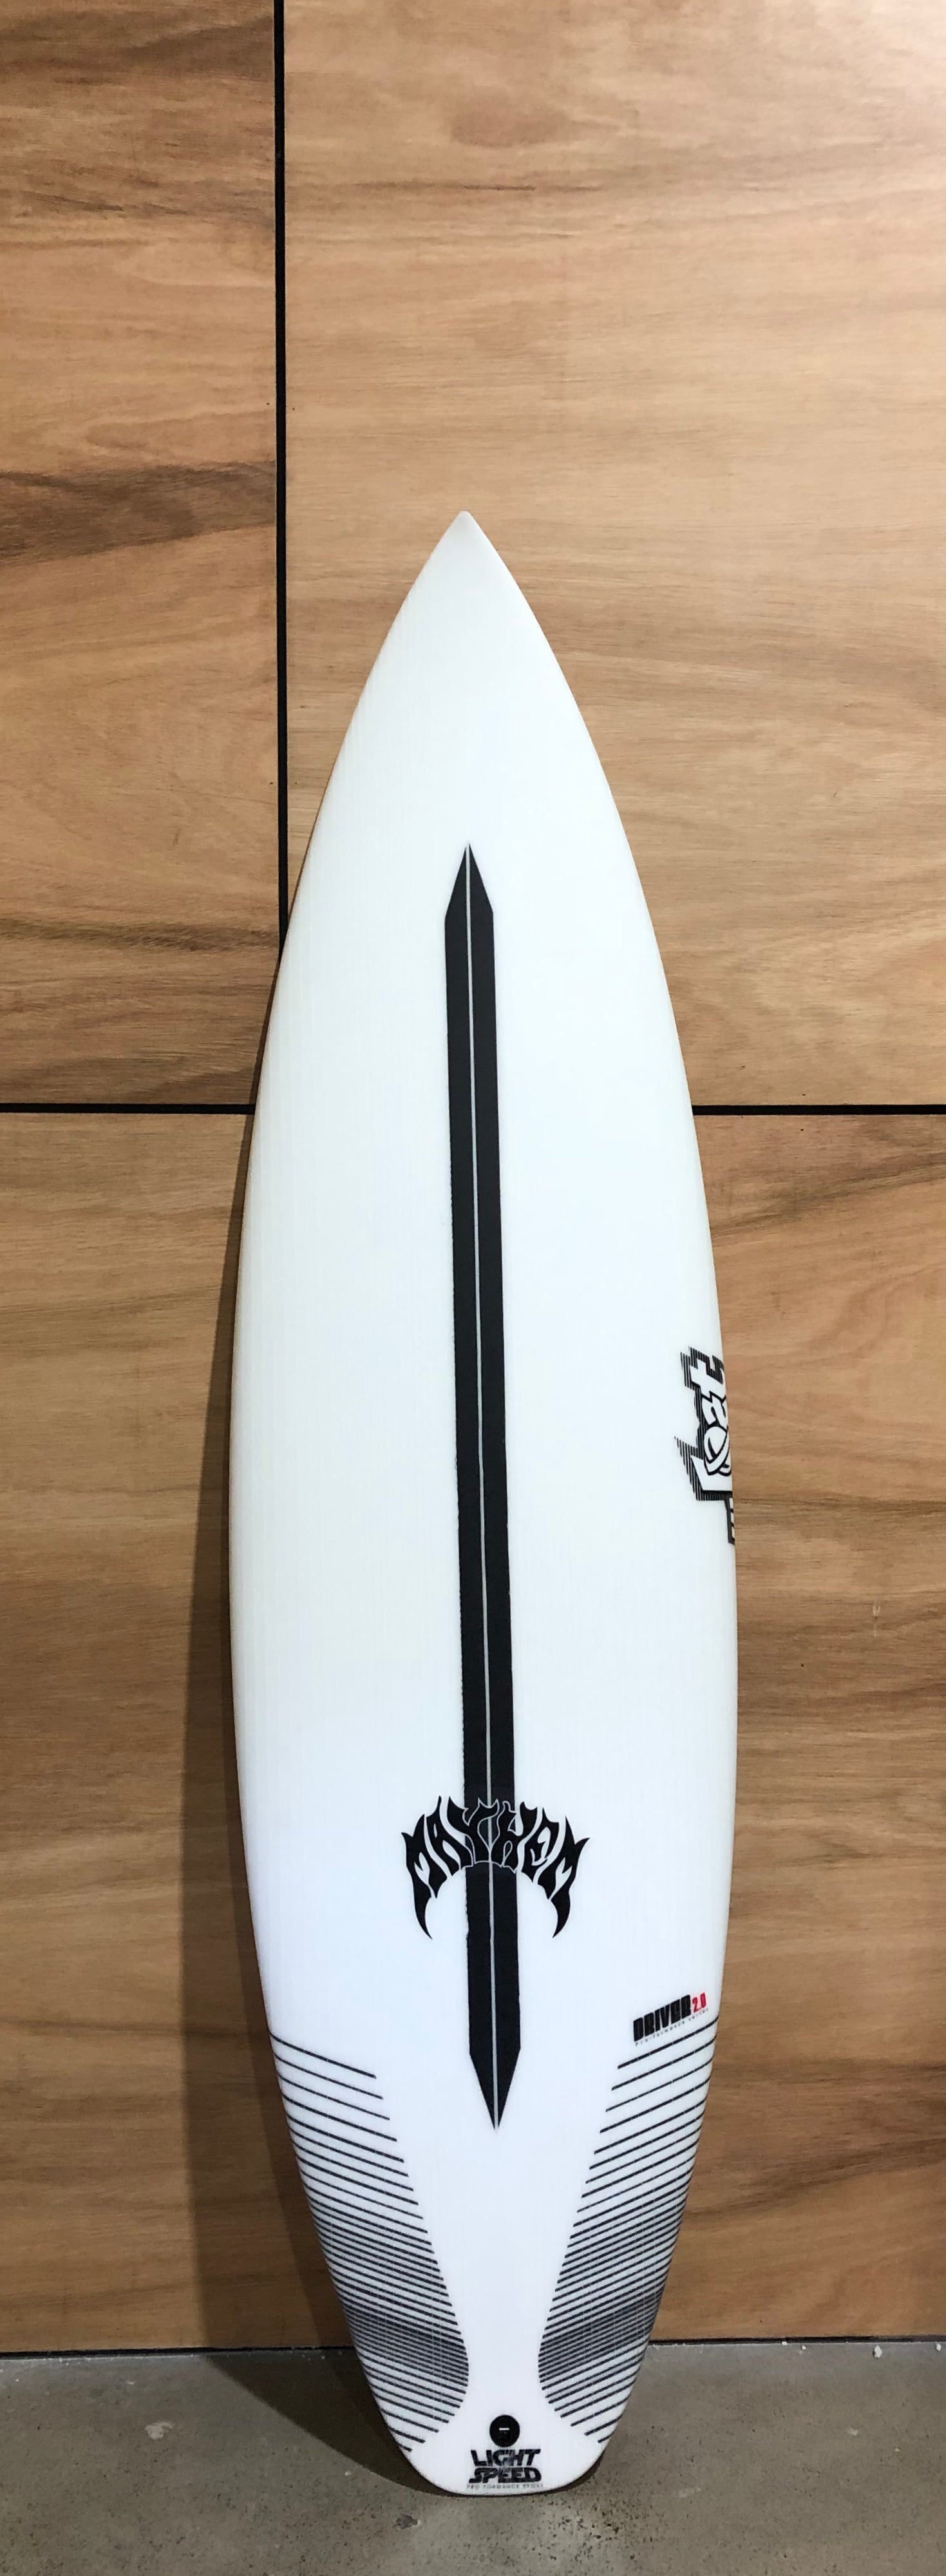 Lost DRIVER 2.0 Squash Tail | Light Speed EPS - Board Store Lostsurfboard  